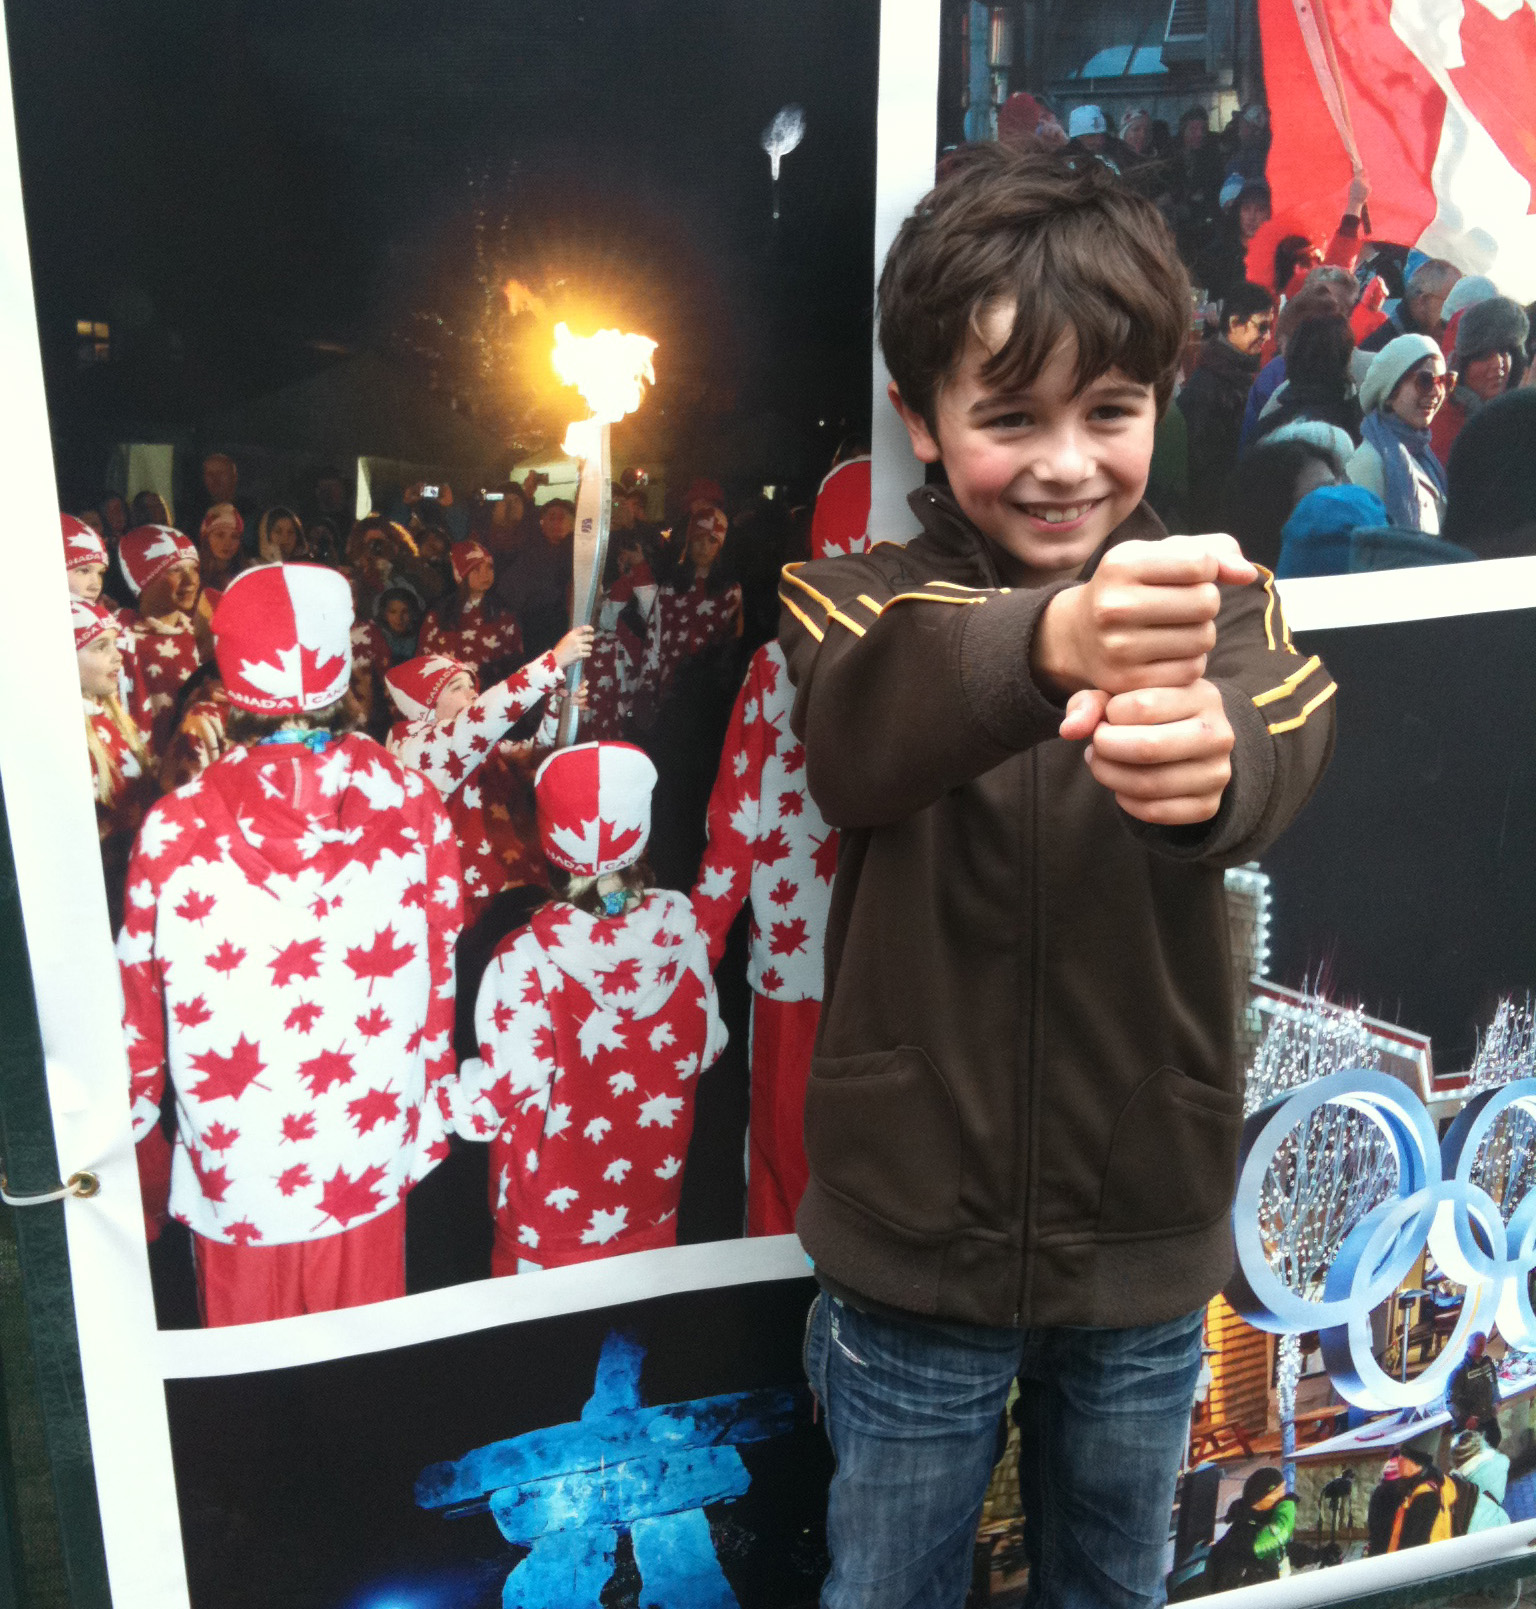 Valin in front of photo of himself carrying the games torch in the Whistler city square.